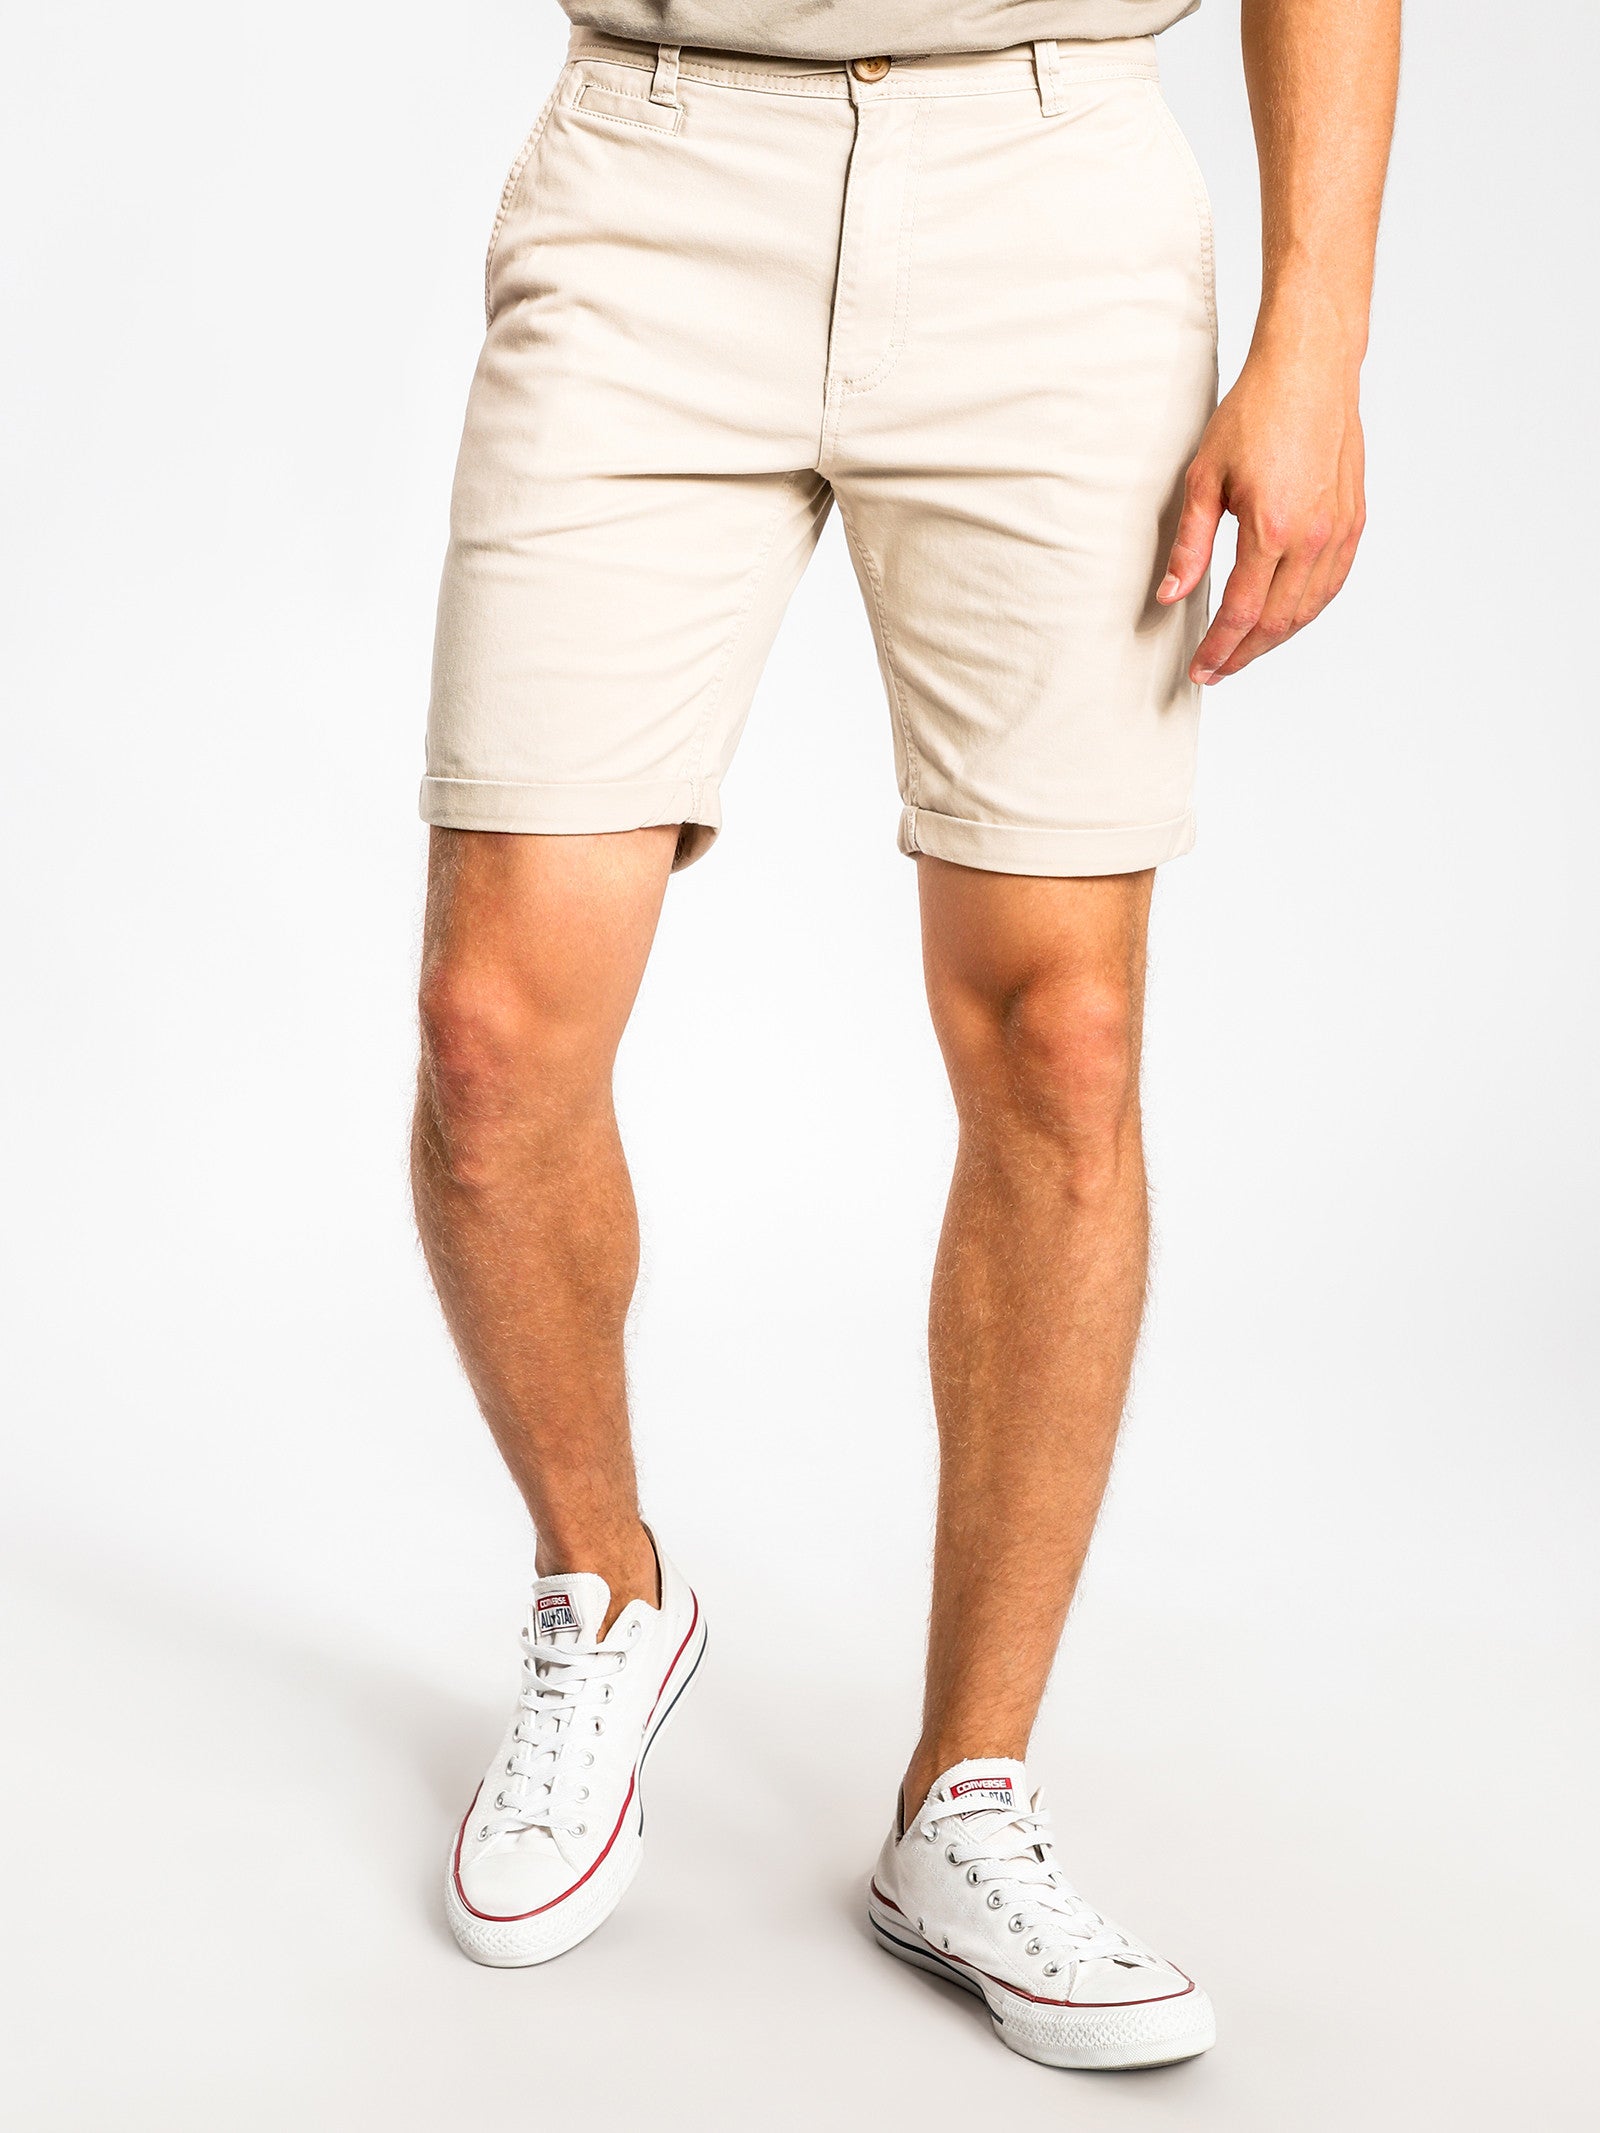 Malabar Chino Short in Navy or Stone or Army - Milu James St